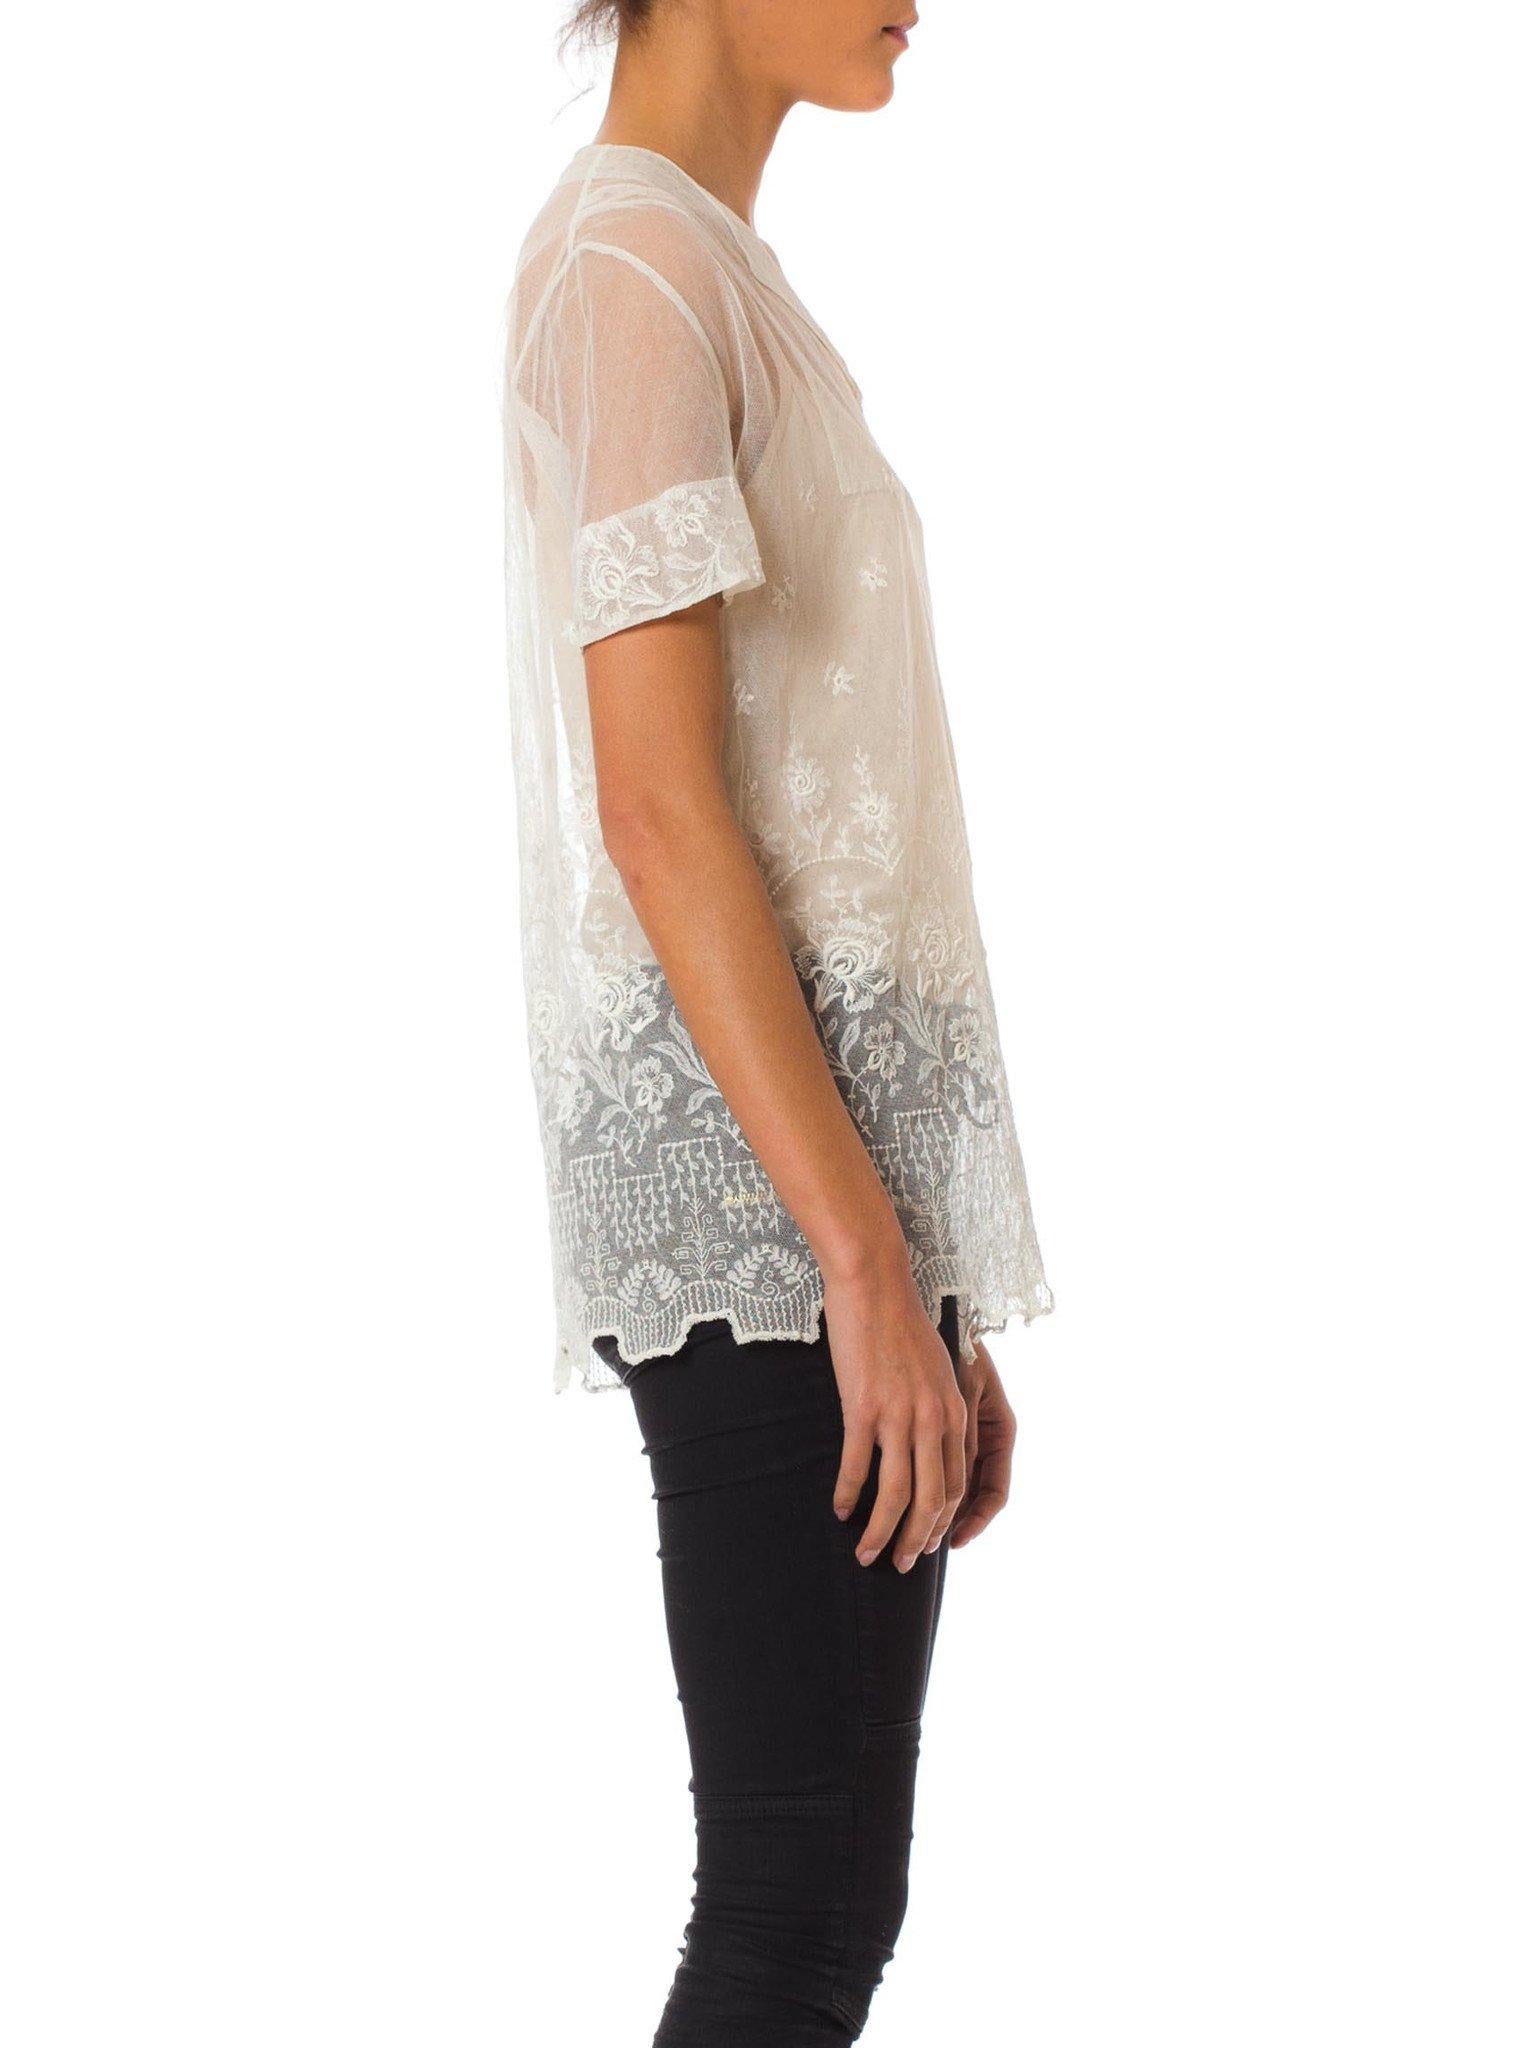 embroidered sheer top